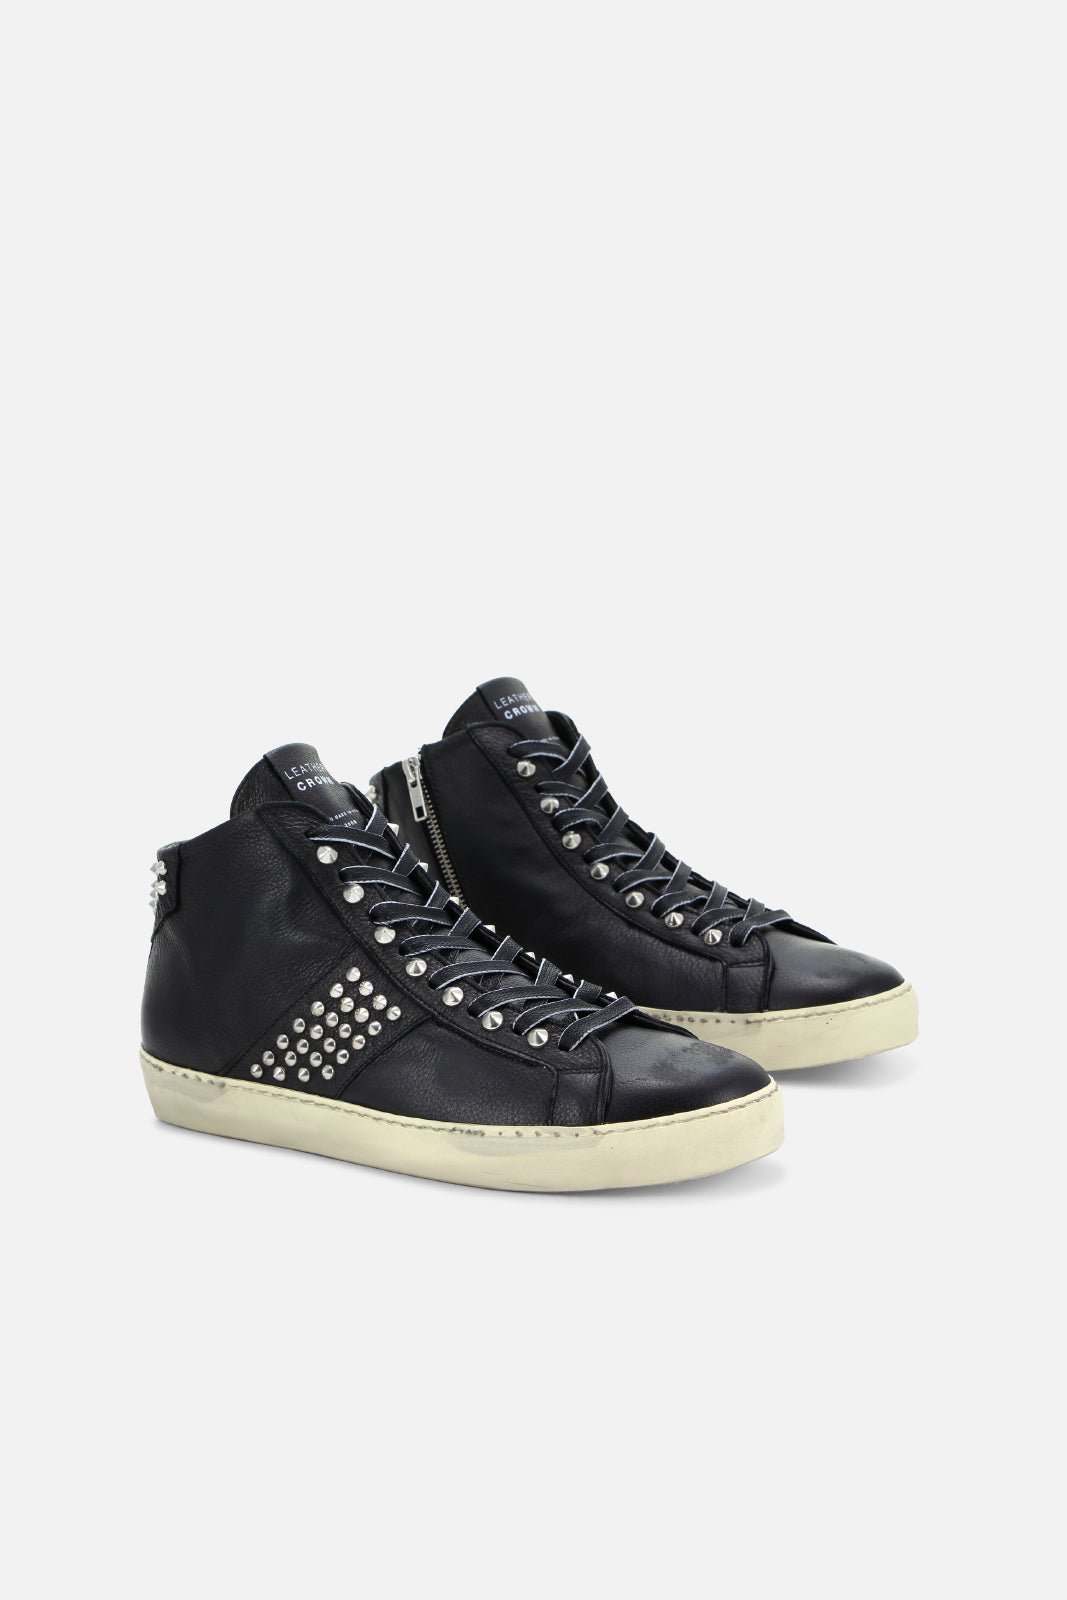 Iconic Stud High Top Sneaker – BANDIER